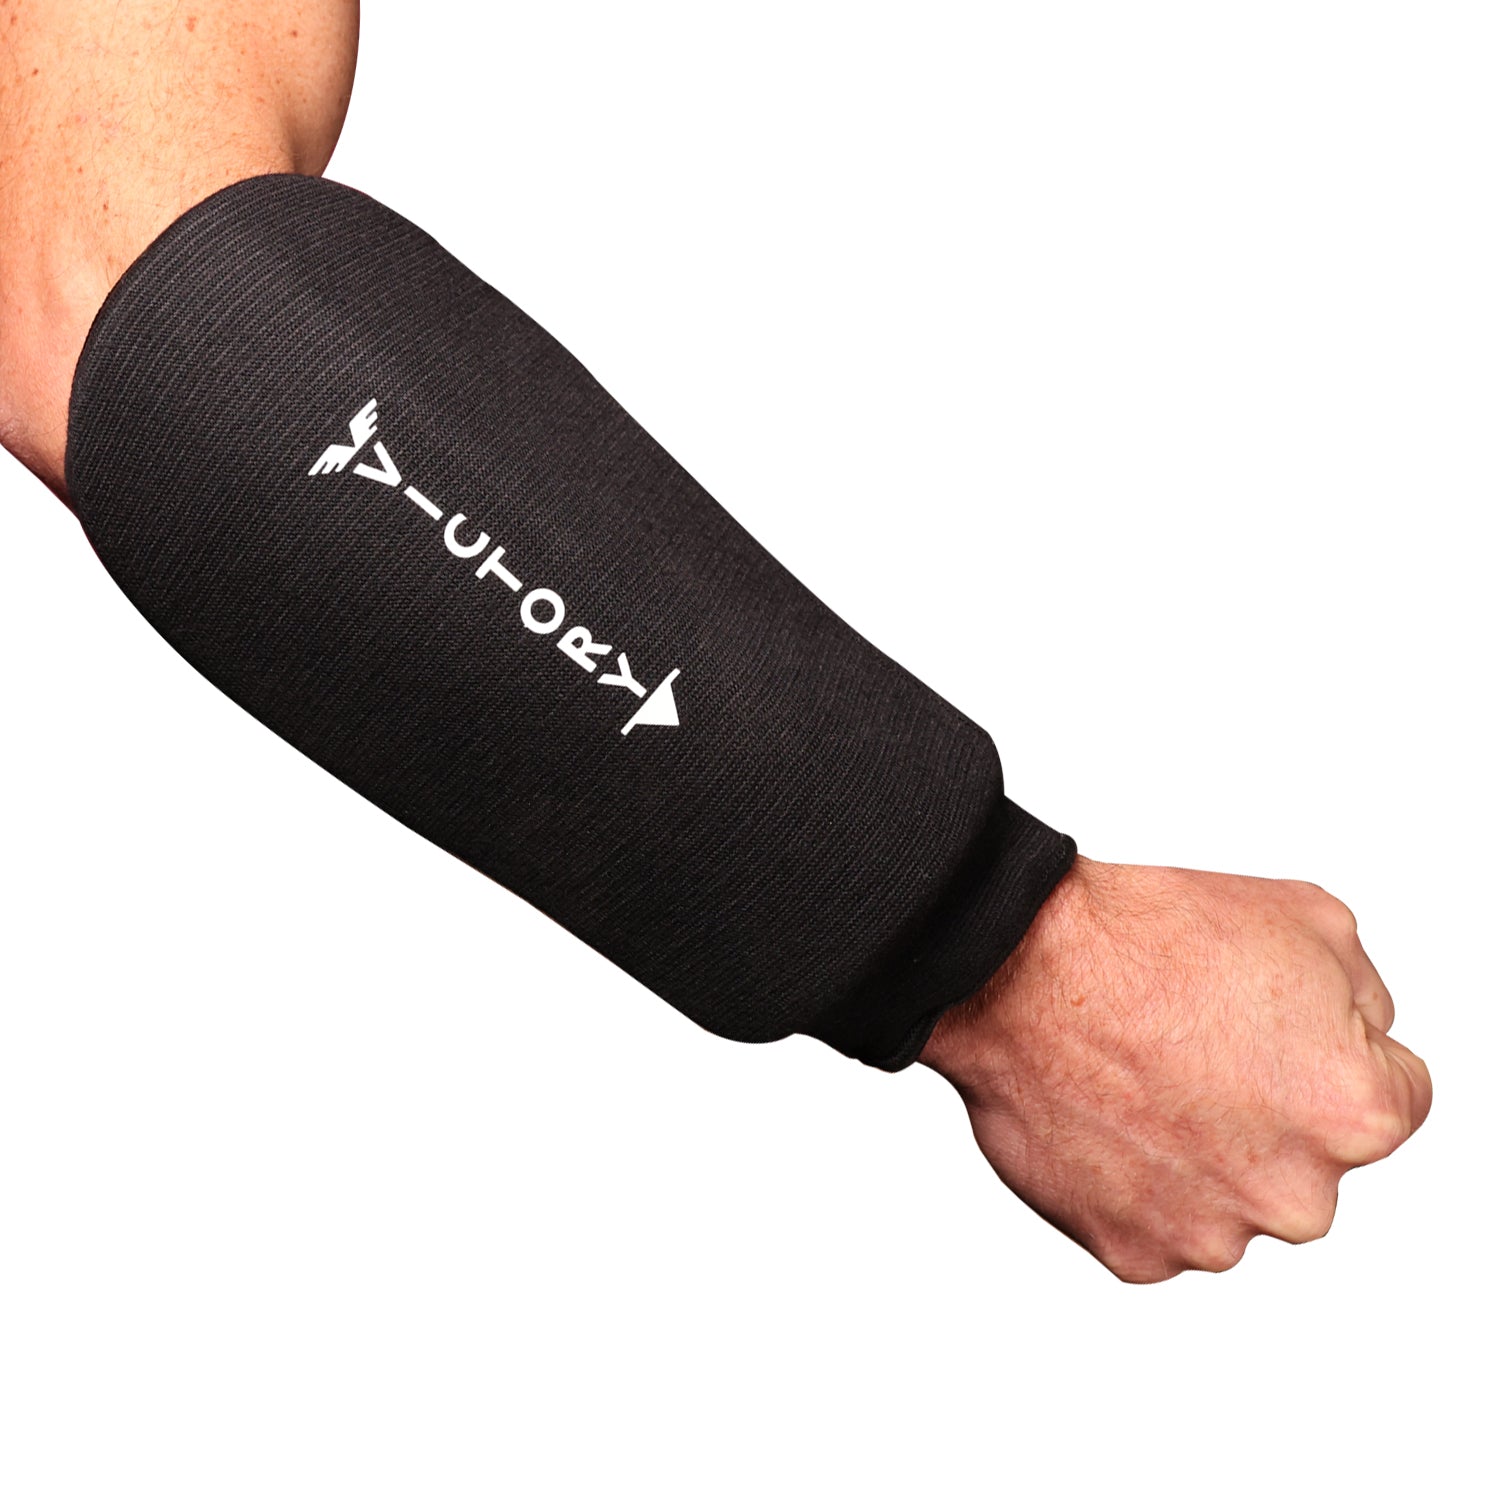 Cloth Padded Arm Sleeves - Forearm Guards - Pair